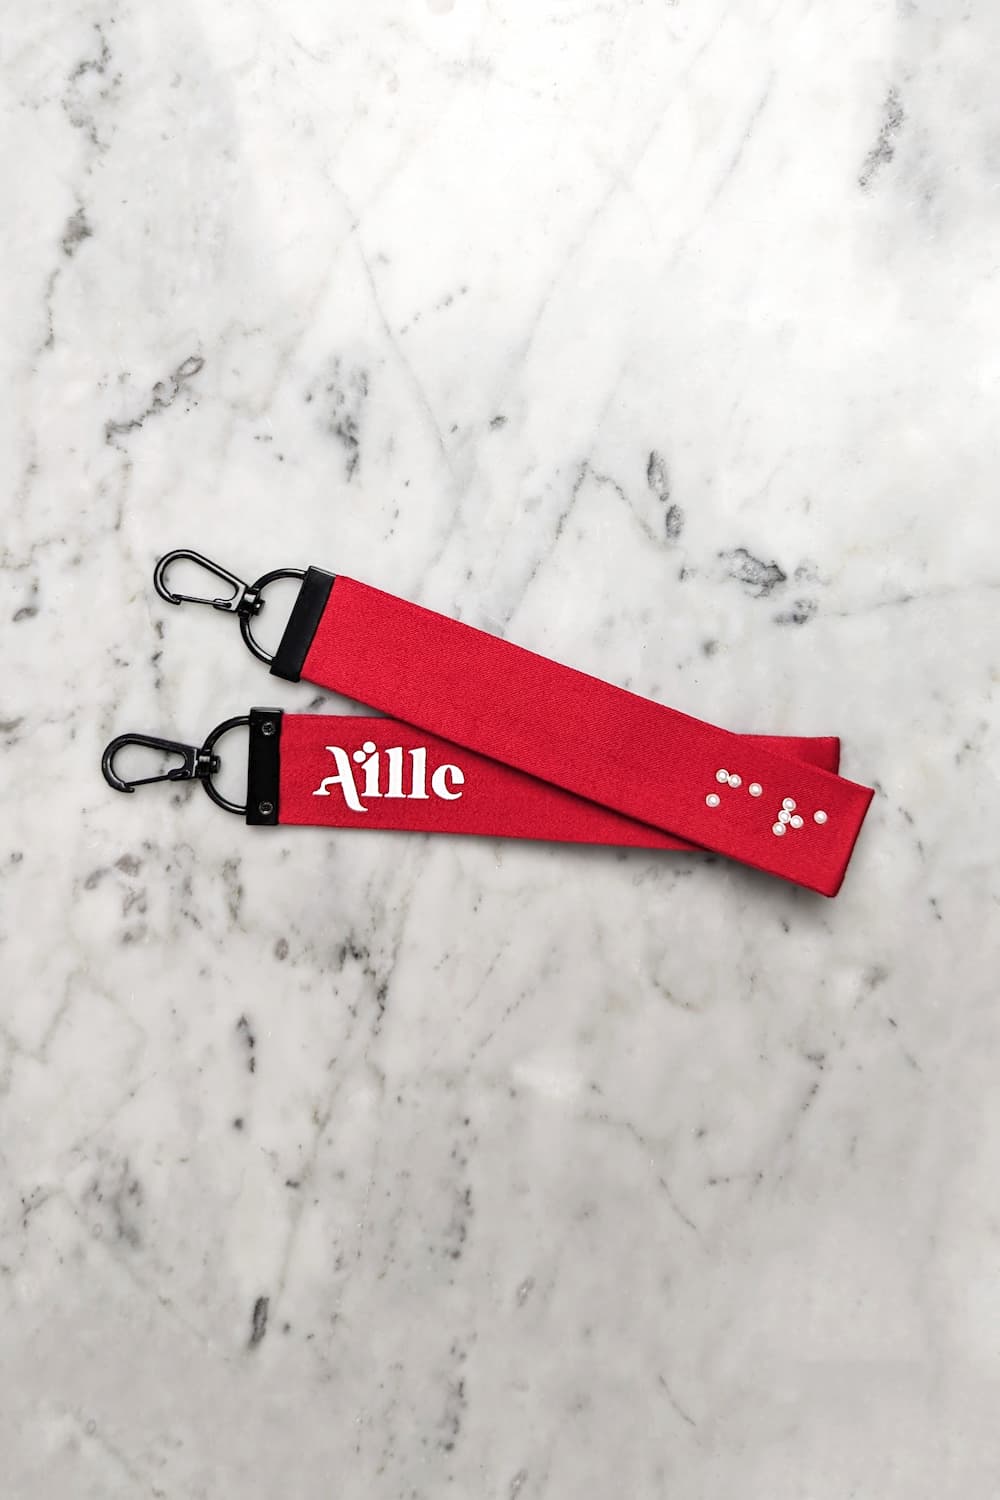 Red keychain with white braille on one side and a white screen printed Aille Design logo on the other side.